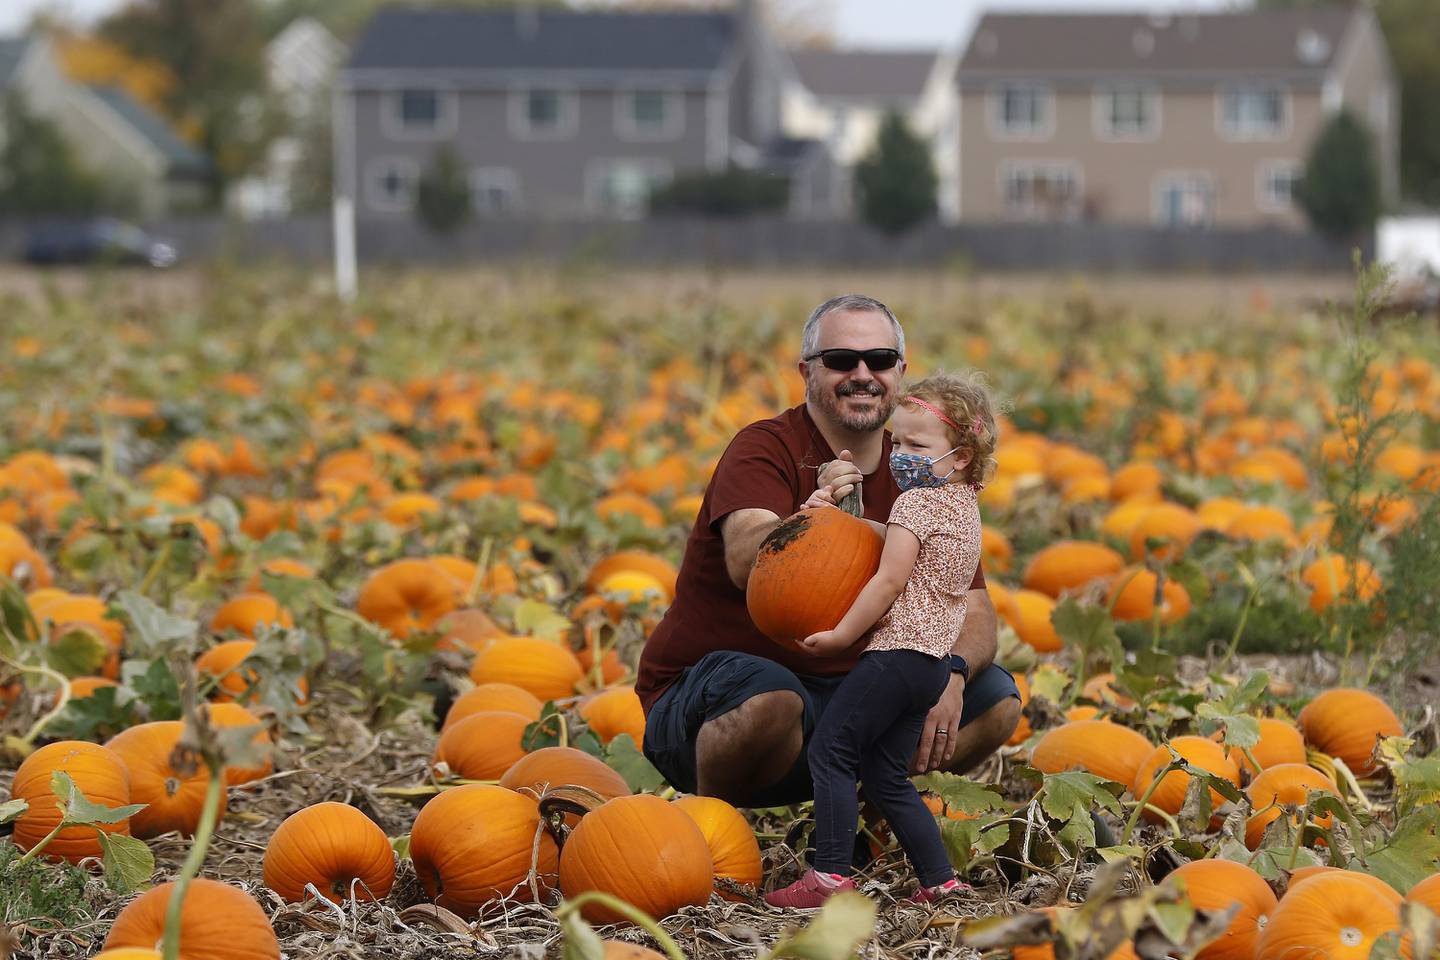 Patrick O'Connor, of Elgin, hands a large pumpkin over to daughter Ava, 4, at the u-pick pumpkin patch during the Fall on the Farm event at Tom's Market on Saturday, Oct. 2, 2021 in Huntley.  The month-long event began on Friday and will conclude Oct. 31.